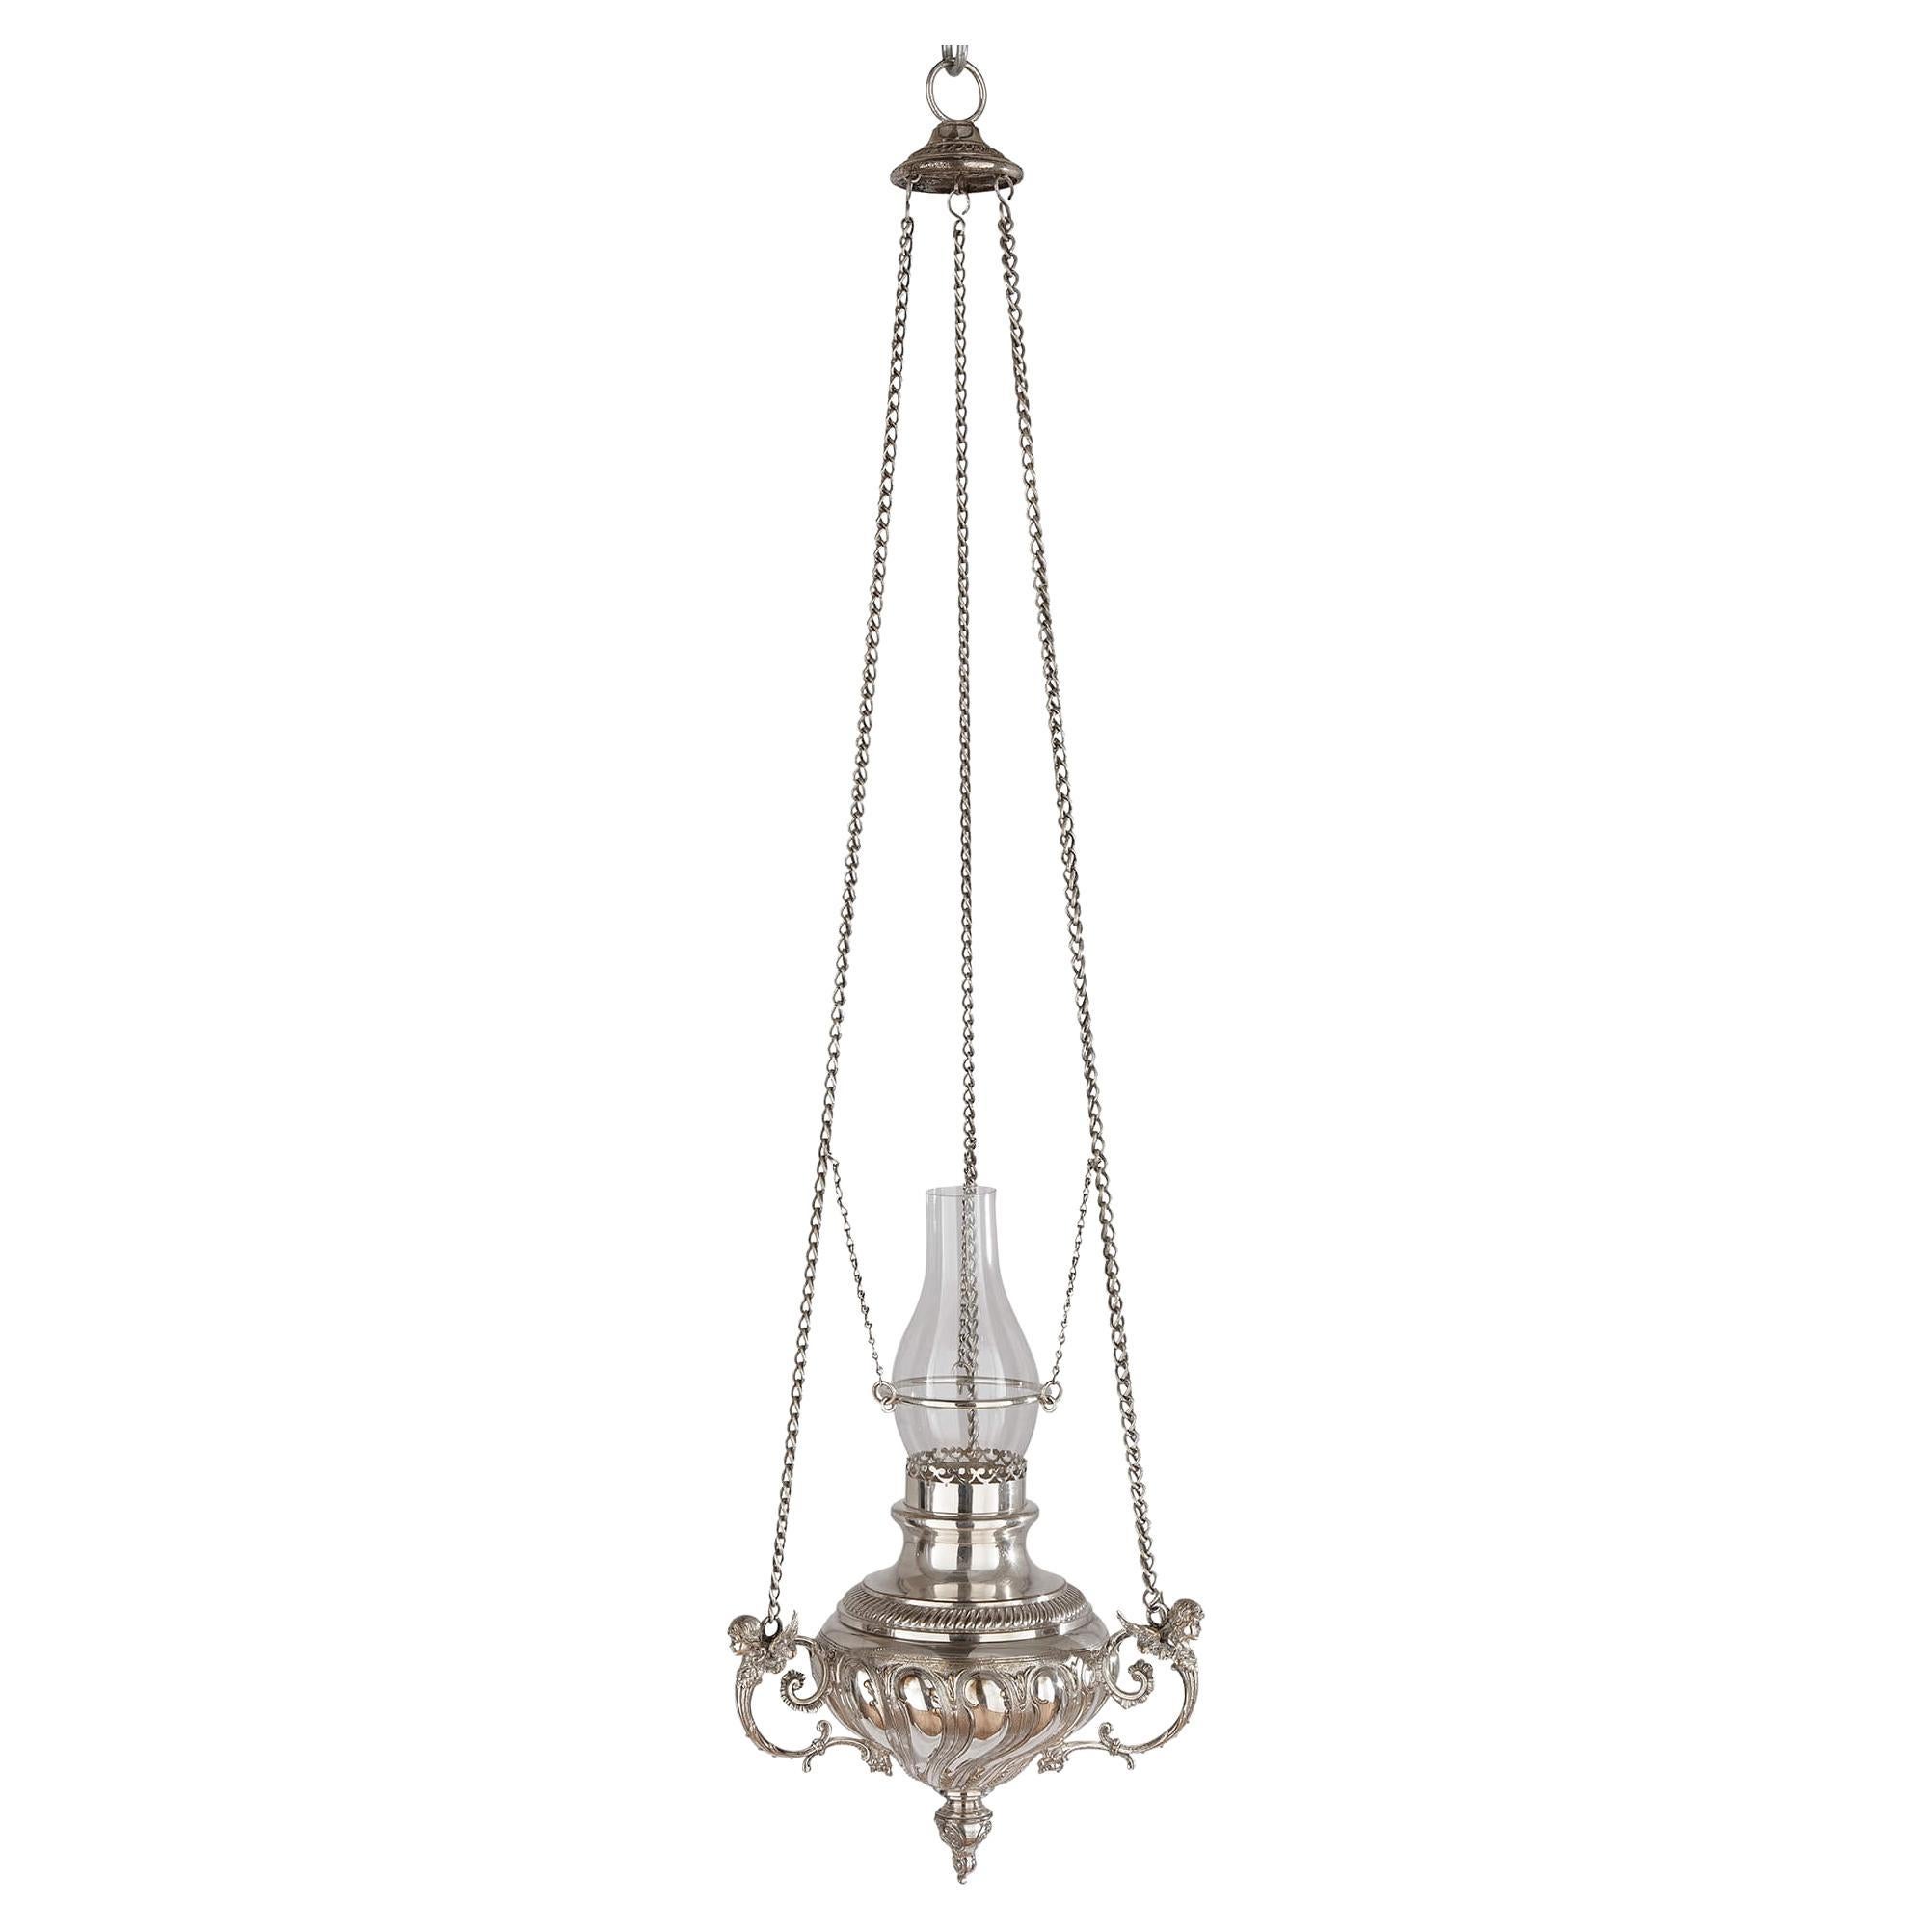 Large German Silver-Plated Hanging Lantern by WMF